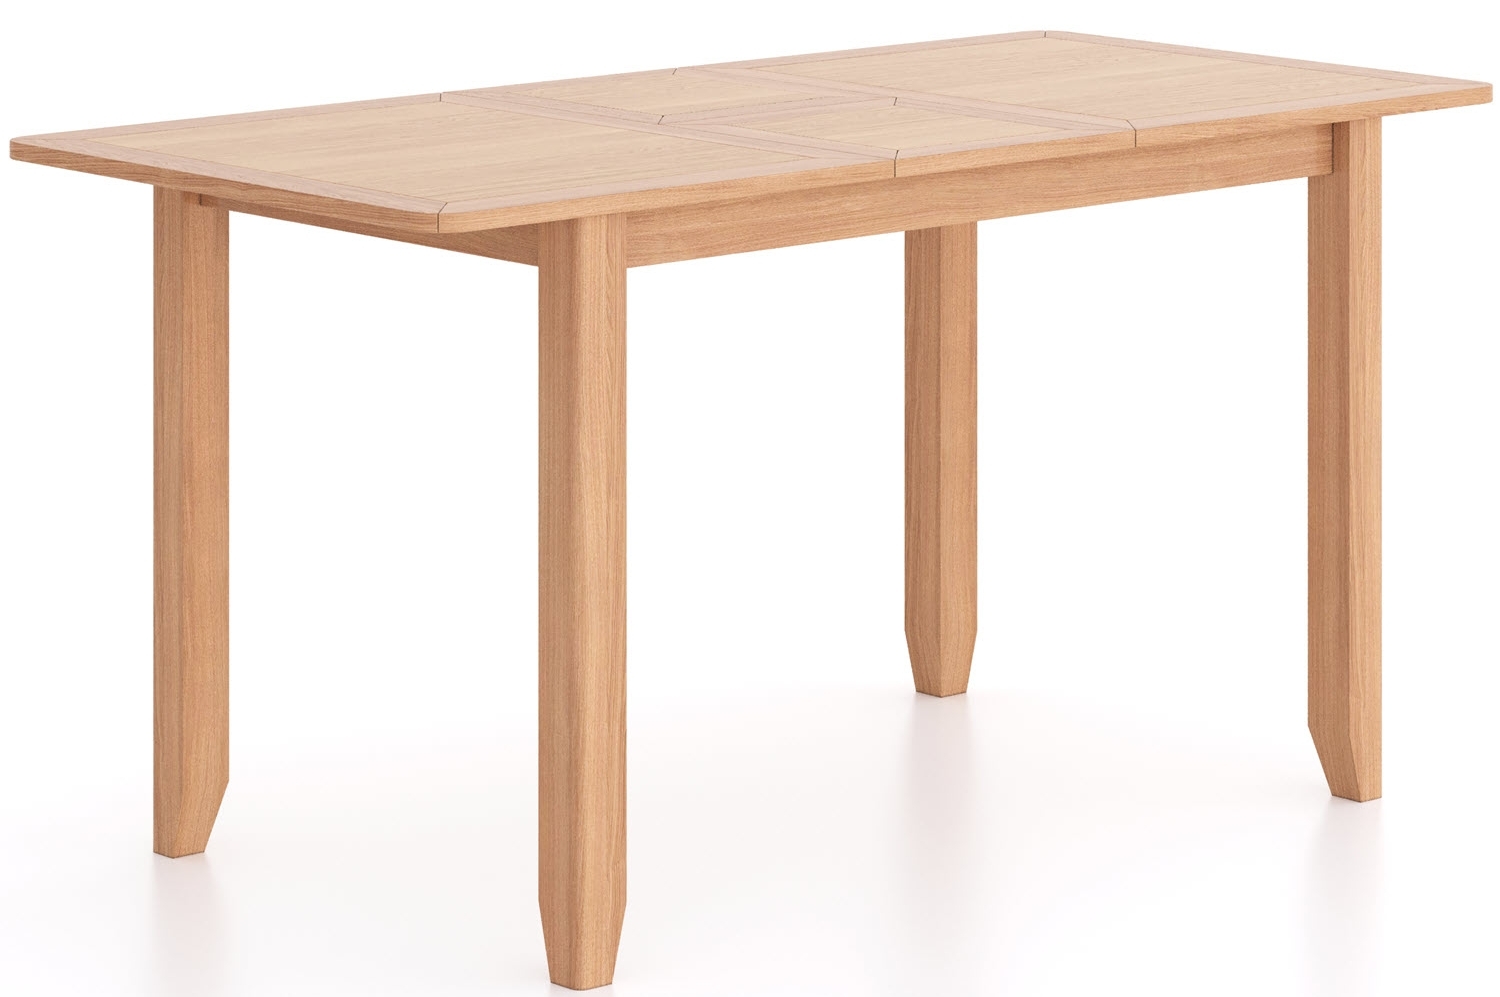 Arden Dining Table 125cm165cm Seats 4 To 6 Diners Extending Rectangular Top